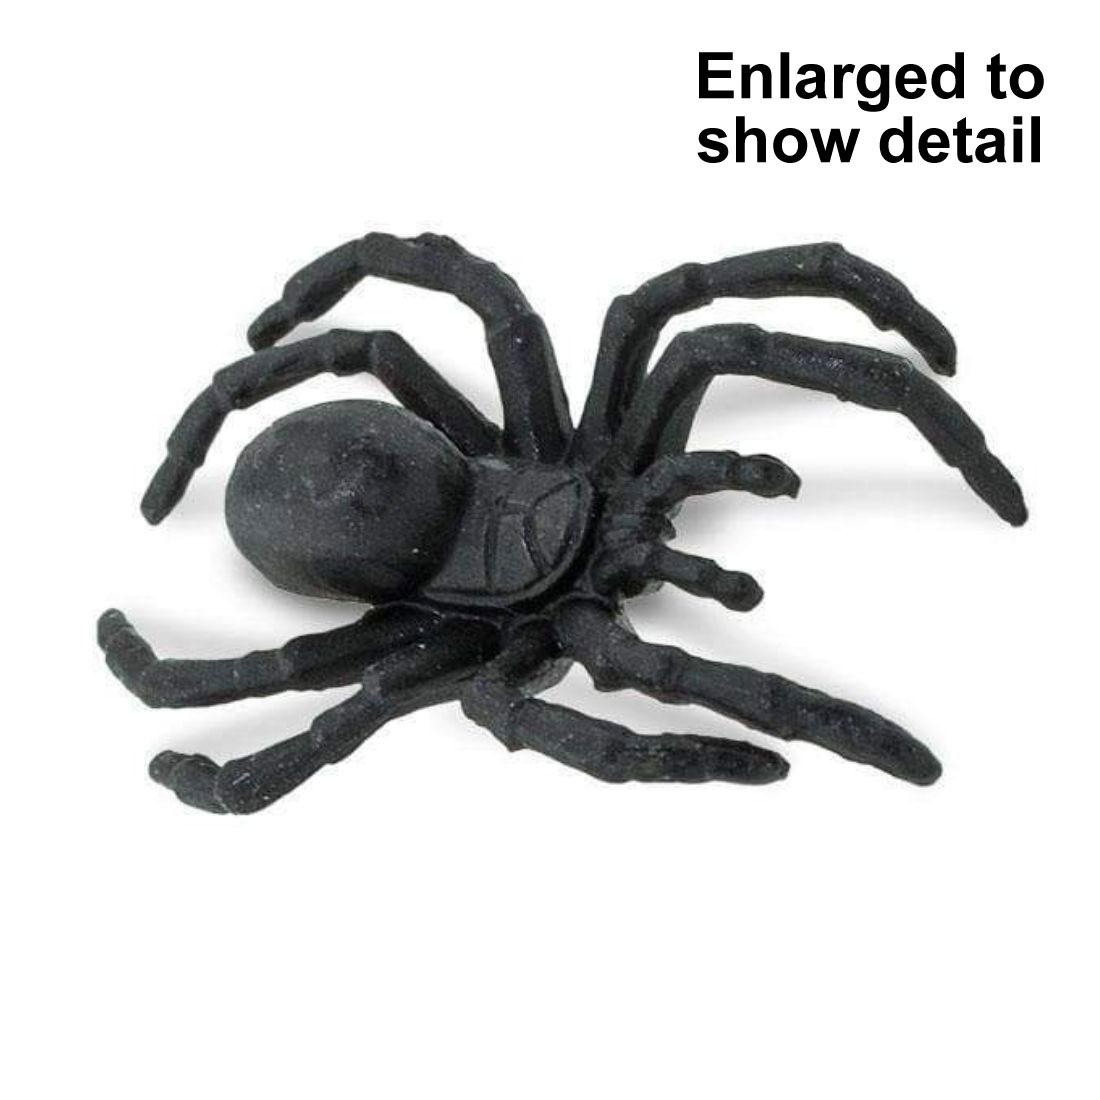 Spider Good Luck Mini Figurine with the text Enlarged to Show Detail